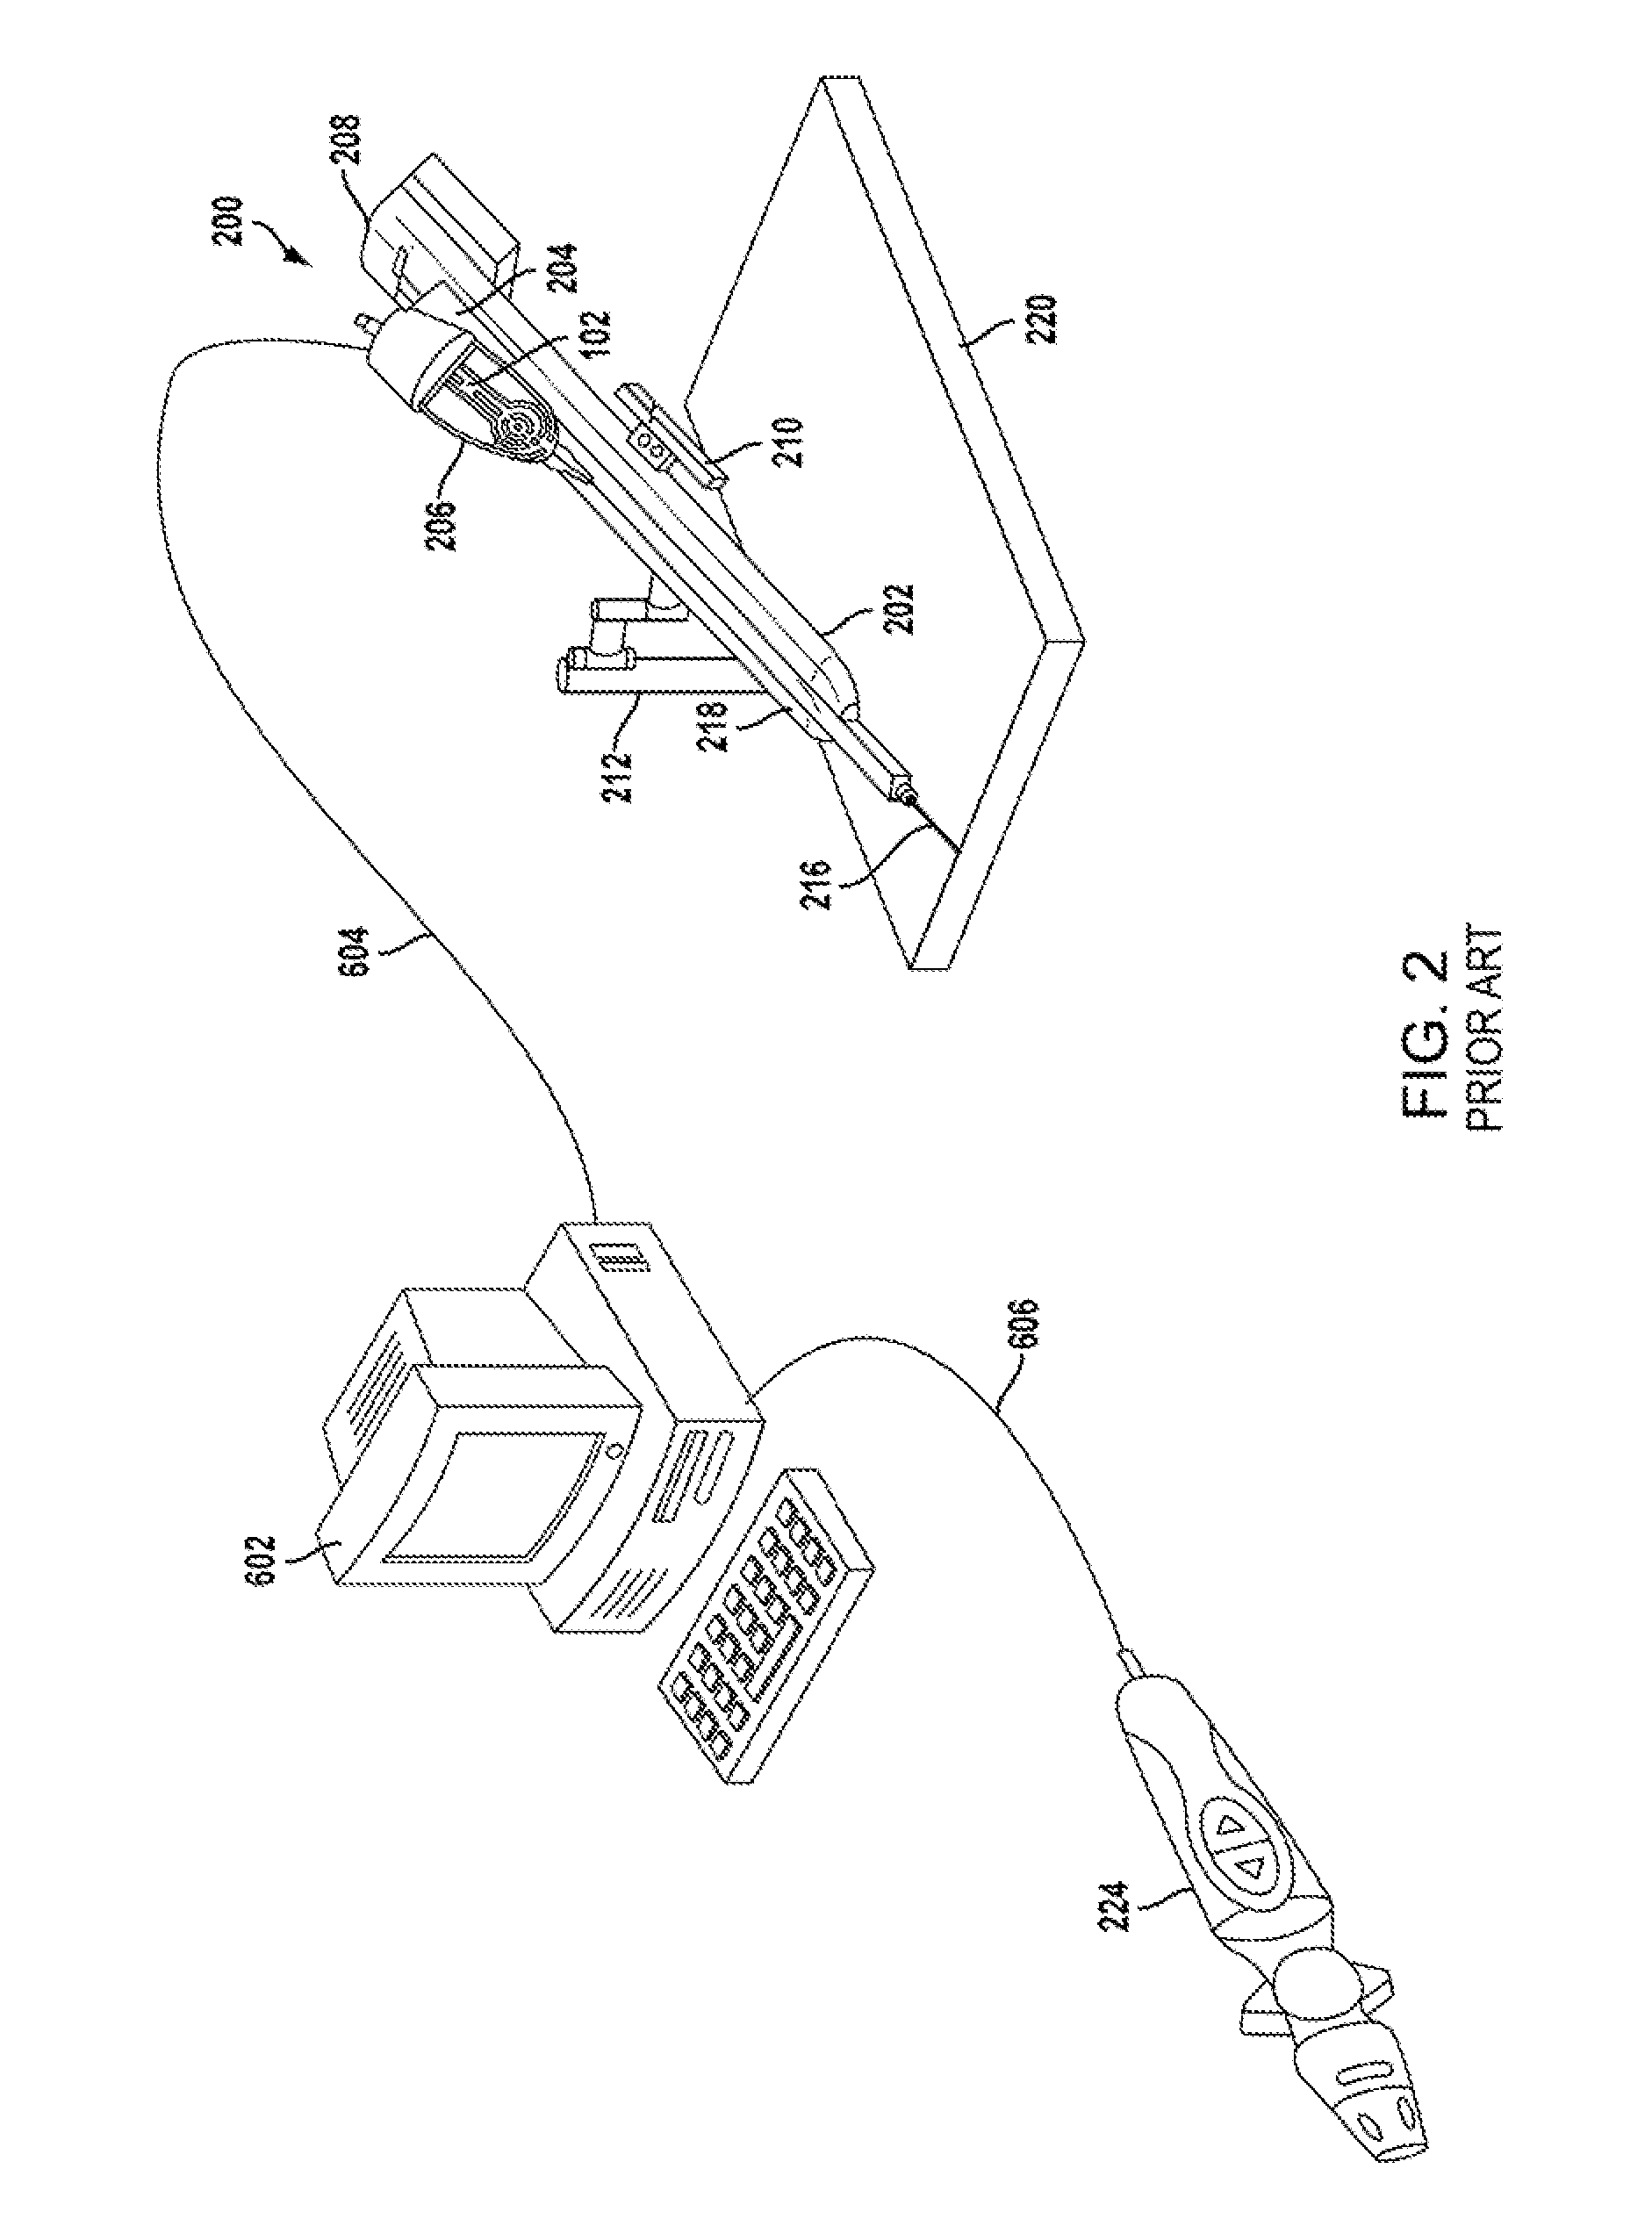 Components for multiple axis control of a catheter in a catheter positioning system